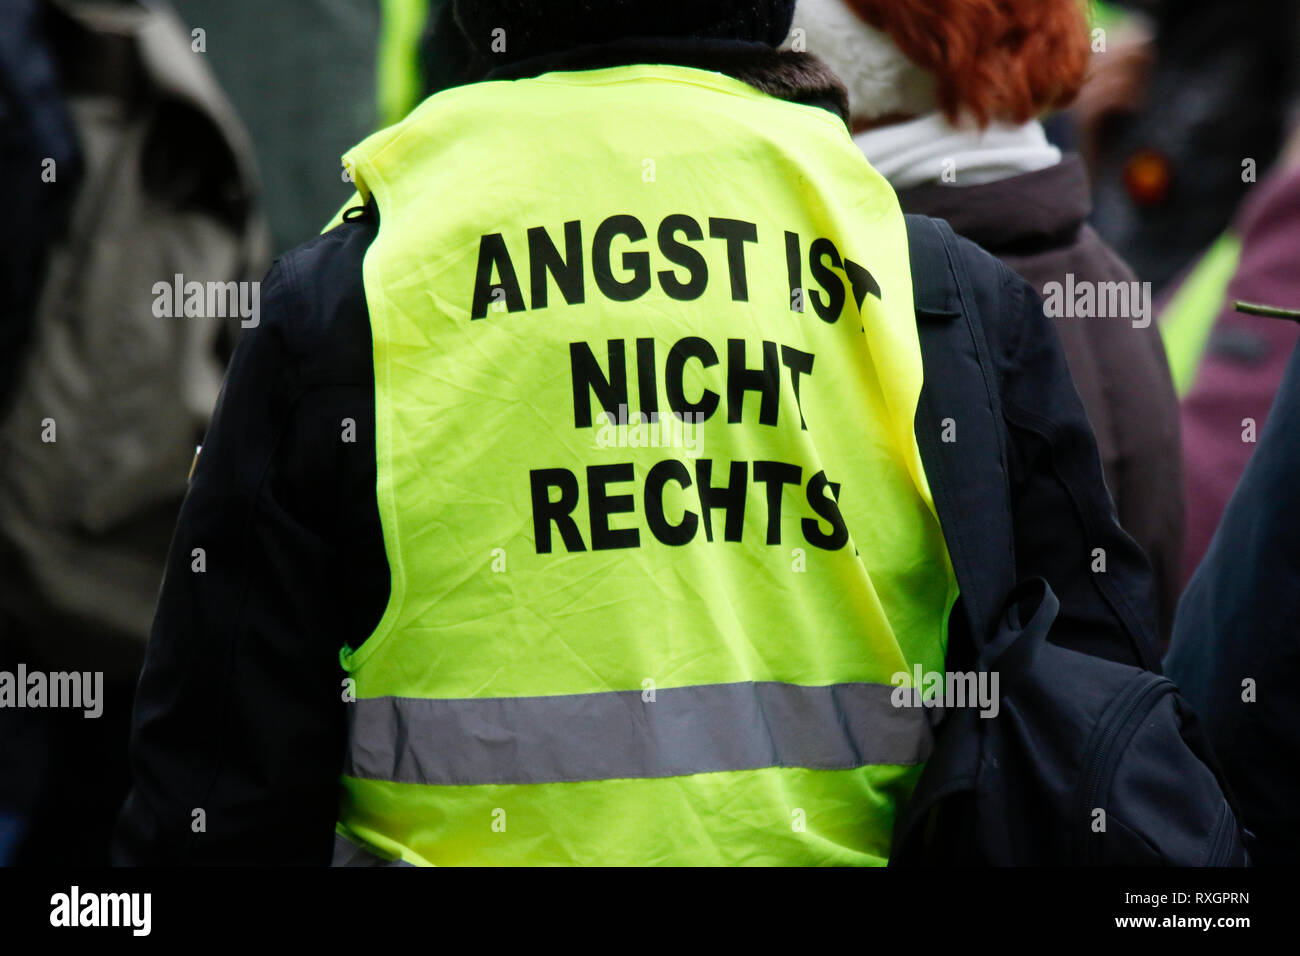 Landau, Germany. 9th March 2019. A protester wears a yellow vest with 'Fear is not right wing' written on it. Around 80 people from right-wing organisations protested in the city of Landau in Palatinate against the German government and migrants. They also adopted the yellow vests from the French yellow vest protest movement. The place of the protest was chosen because of the 2017 stabbing attack in the nearby city of Kandel, in which a 15 year old girl was killed by an asylum seeker. Credit: Michael Debets/Alamy Live News Stock Photo